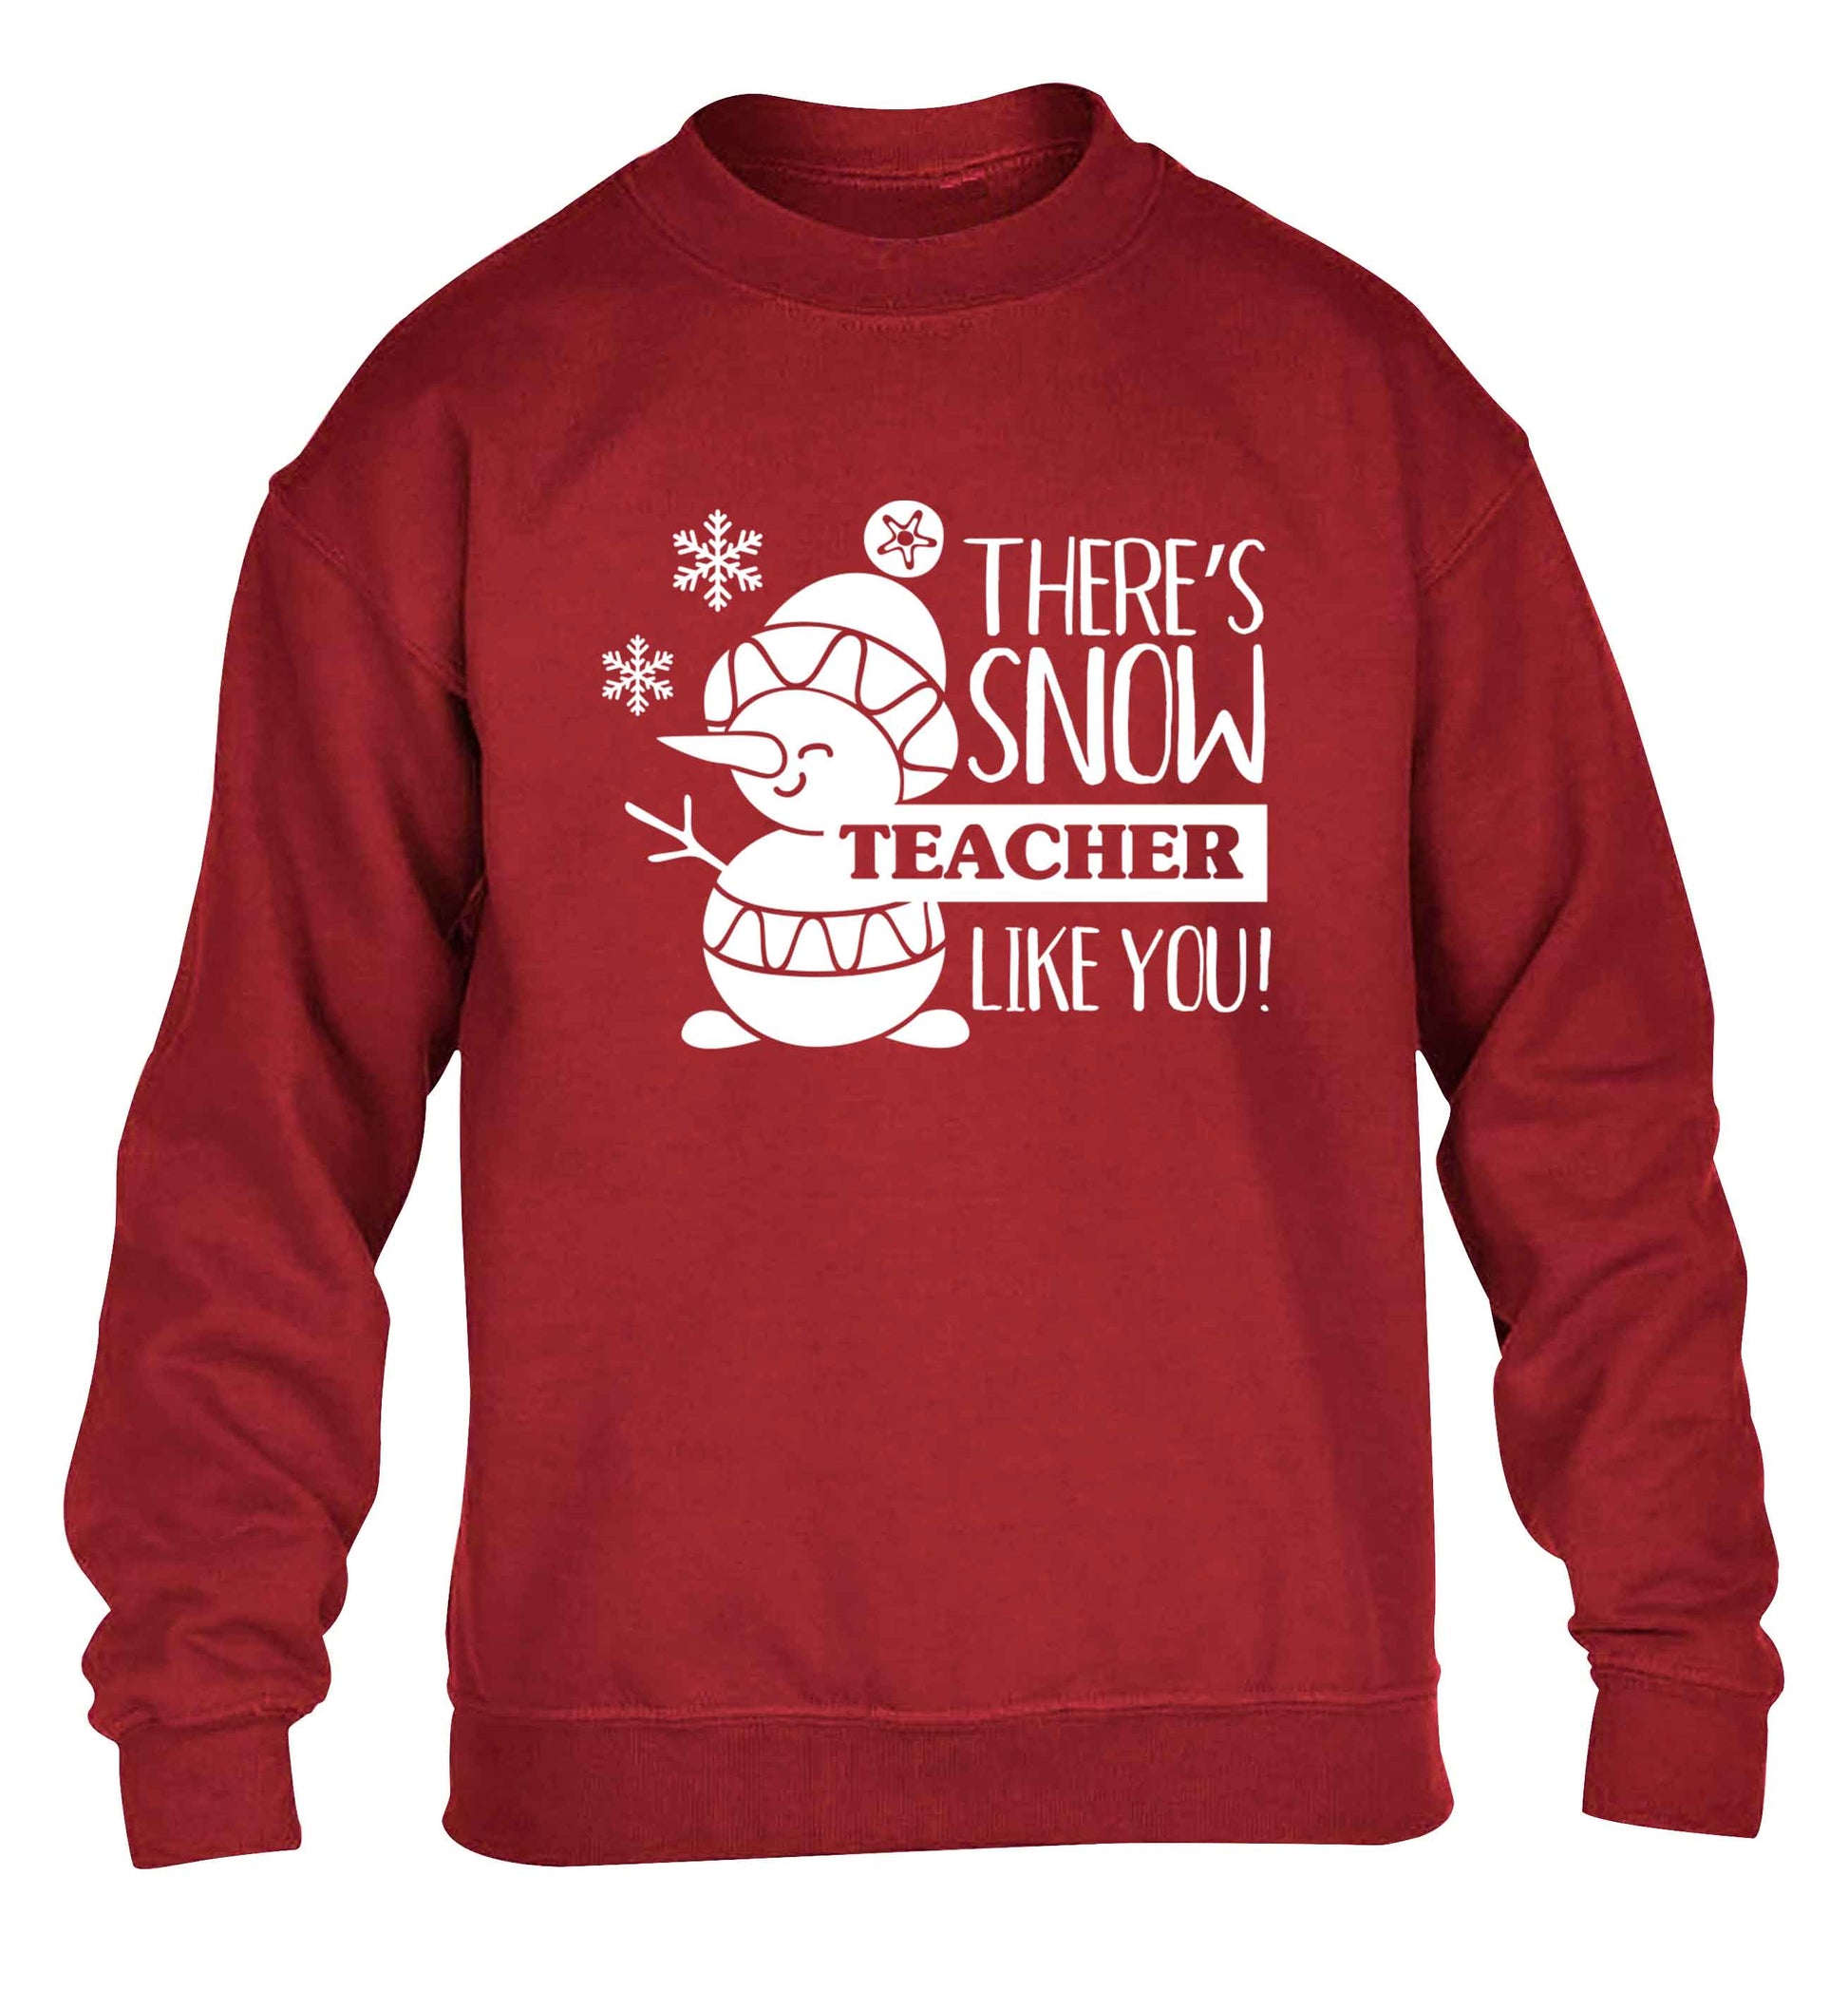 There's snow teacher like you children's grey sweater 12-13 Years